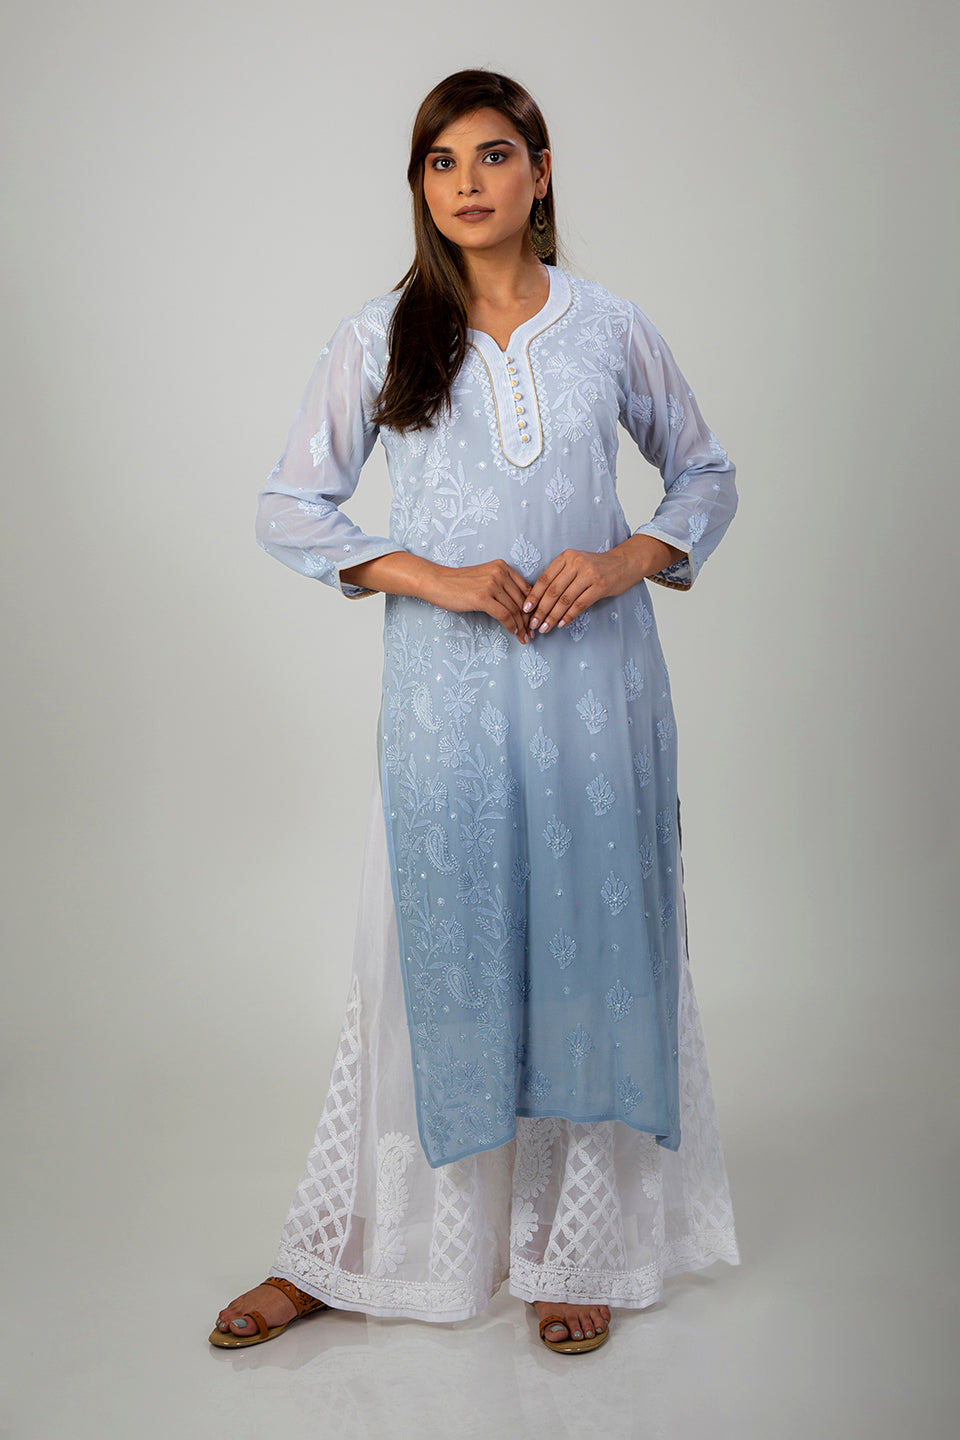 House of Export Hand Embroidered Lucknow Chikan Pure Cotton Kurti Kurta for  Women - White&Blue-Medium : Amazon.in: Fashion